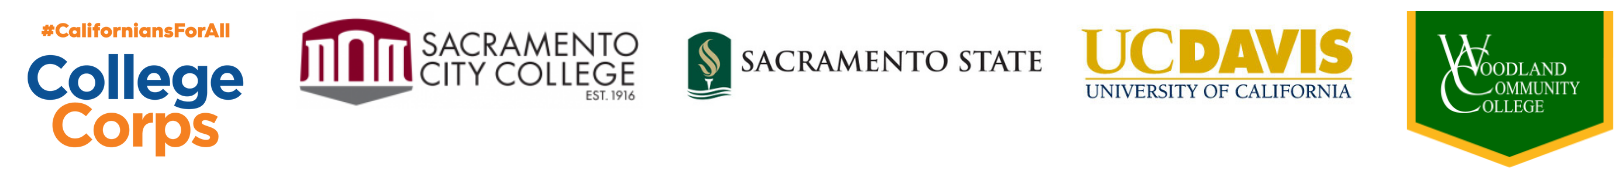 logos of the Californians for All College Corps, Sacramento State University, Sacramento City College, UC Davis and Woodland Community College side by side